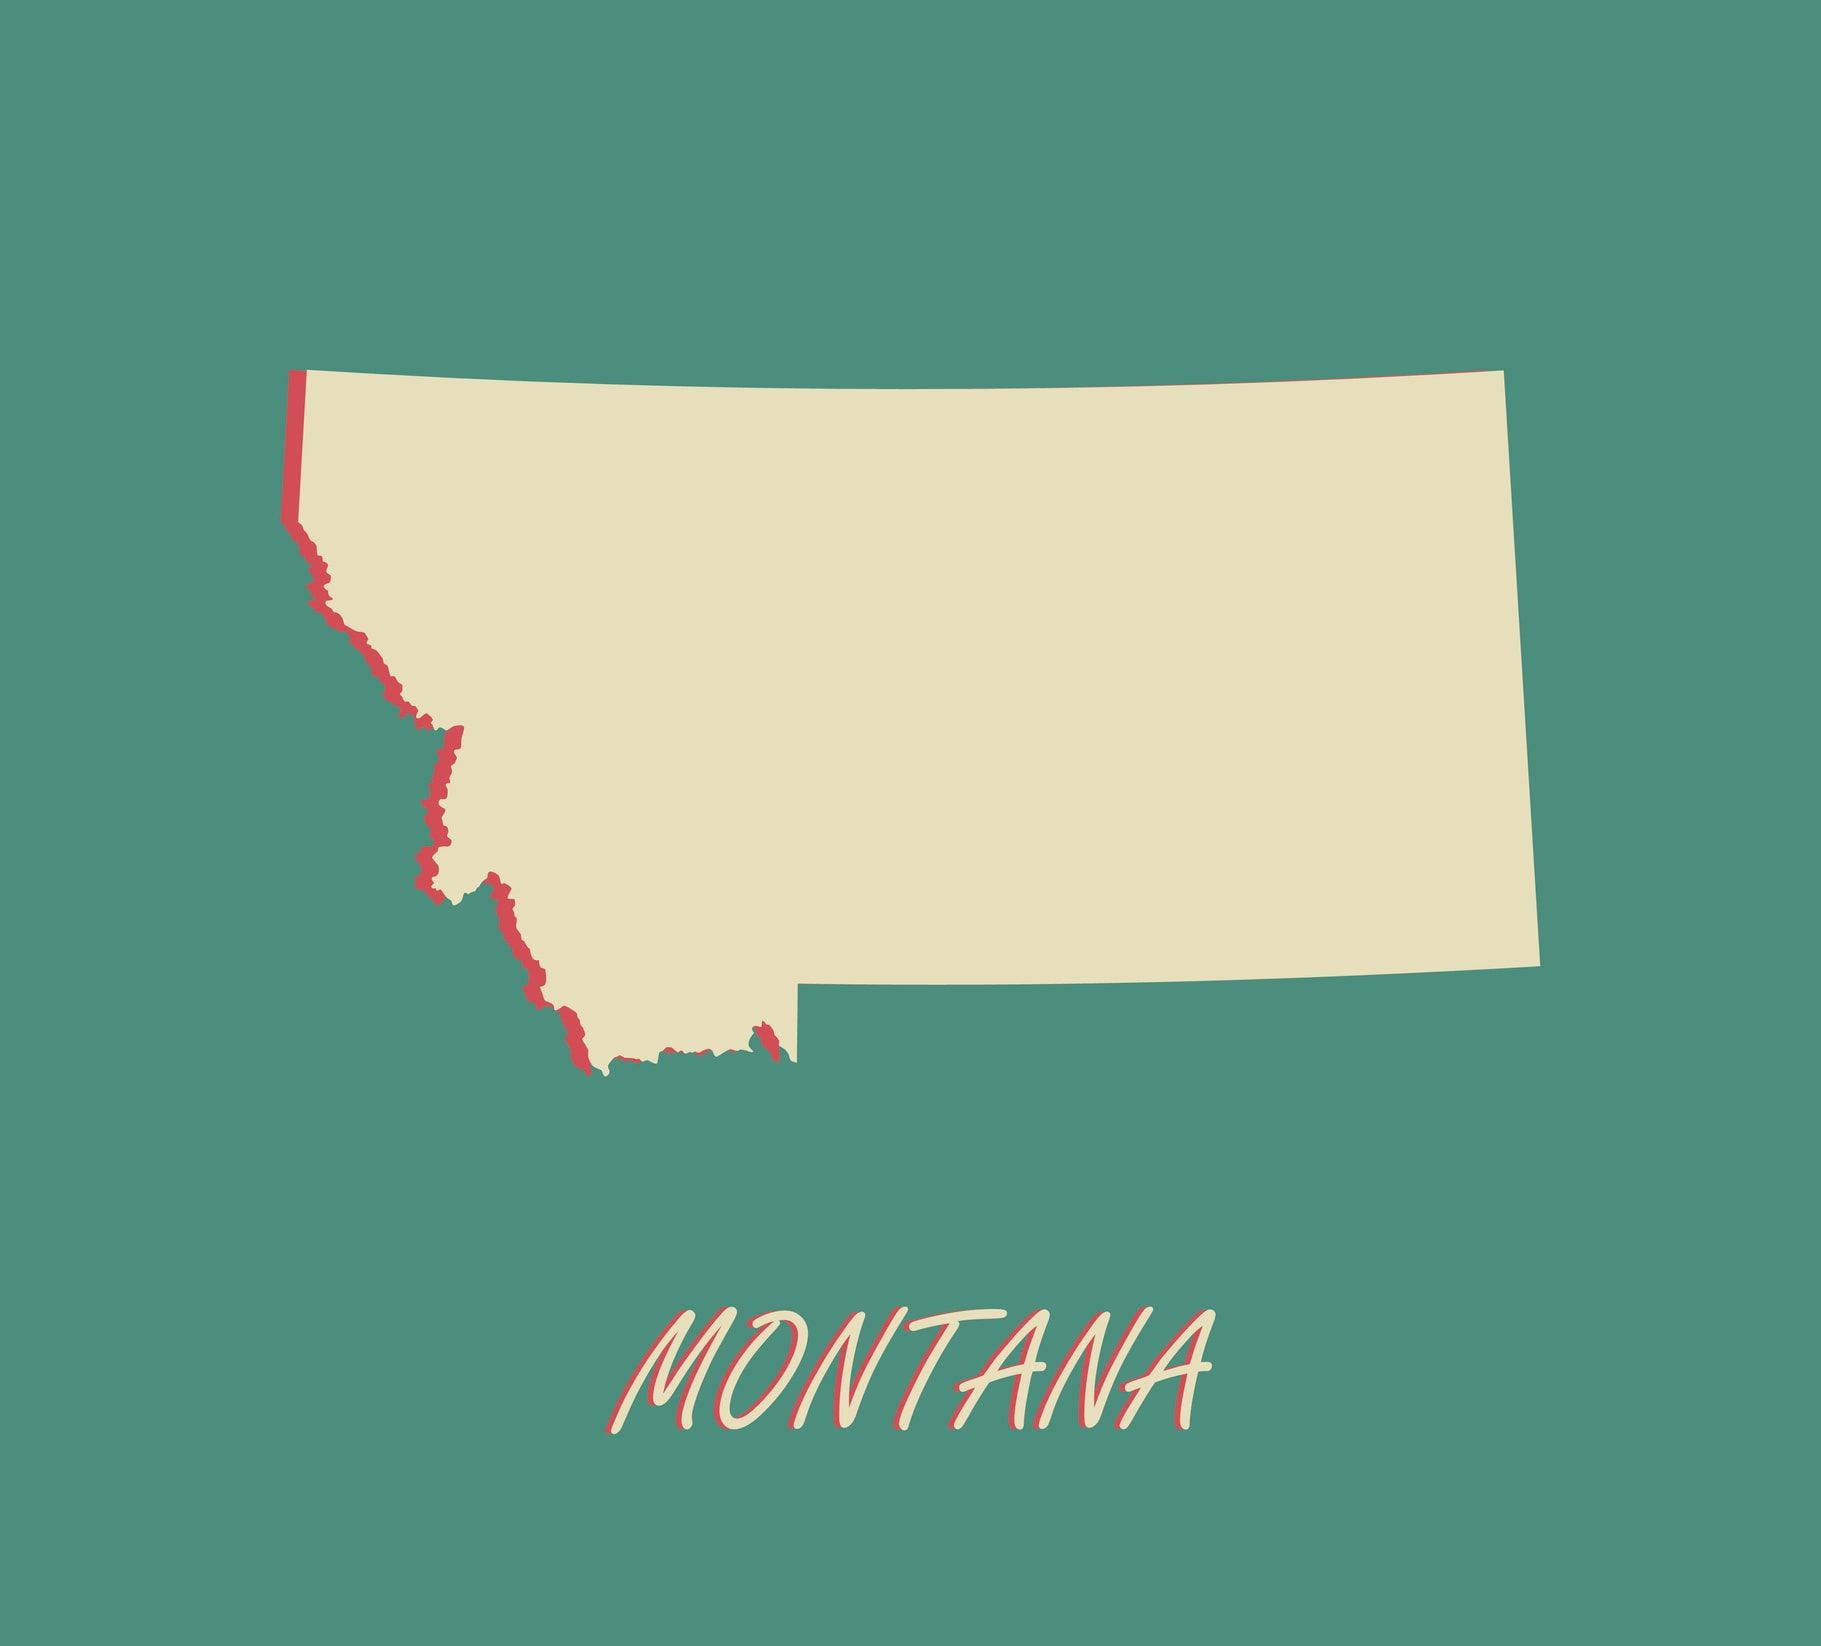 Montana household employment tax and labor law guide